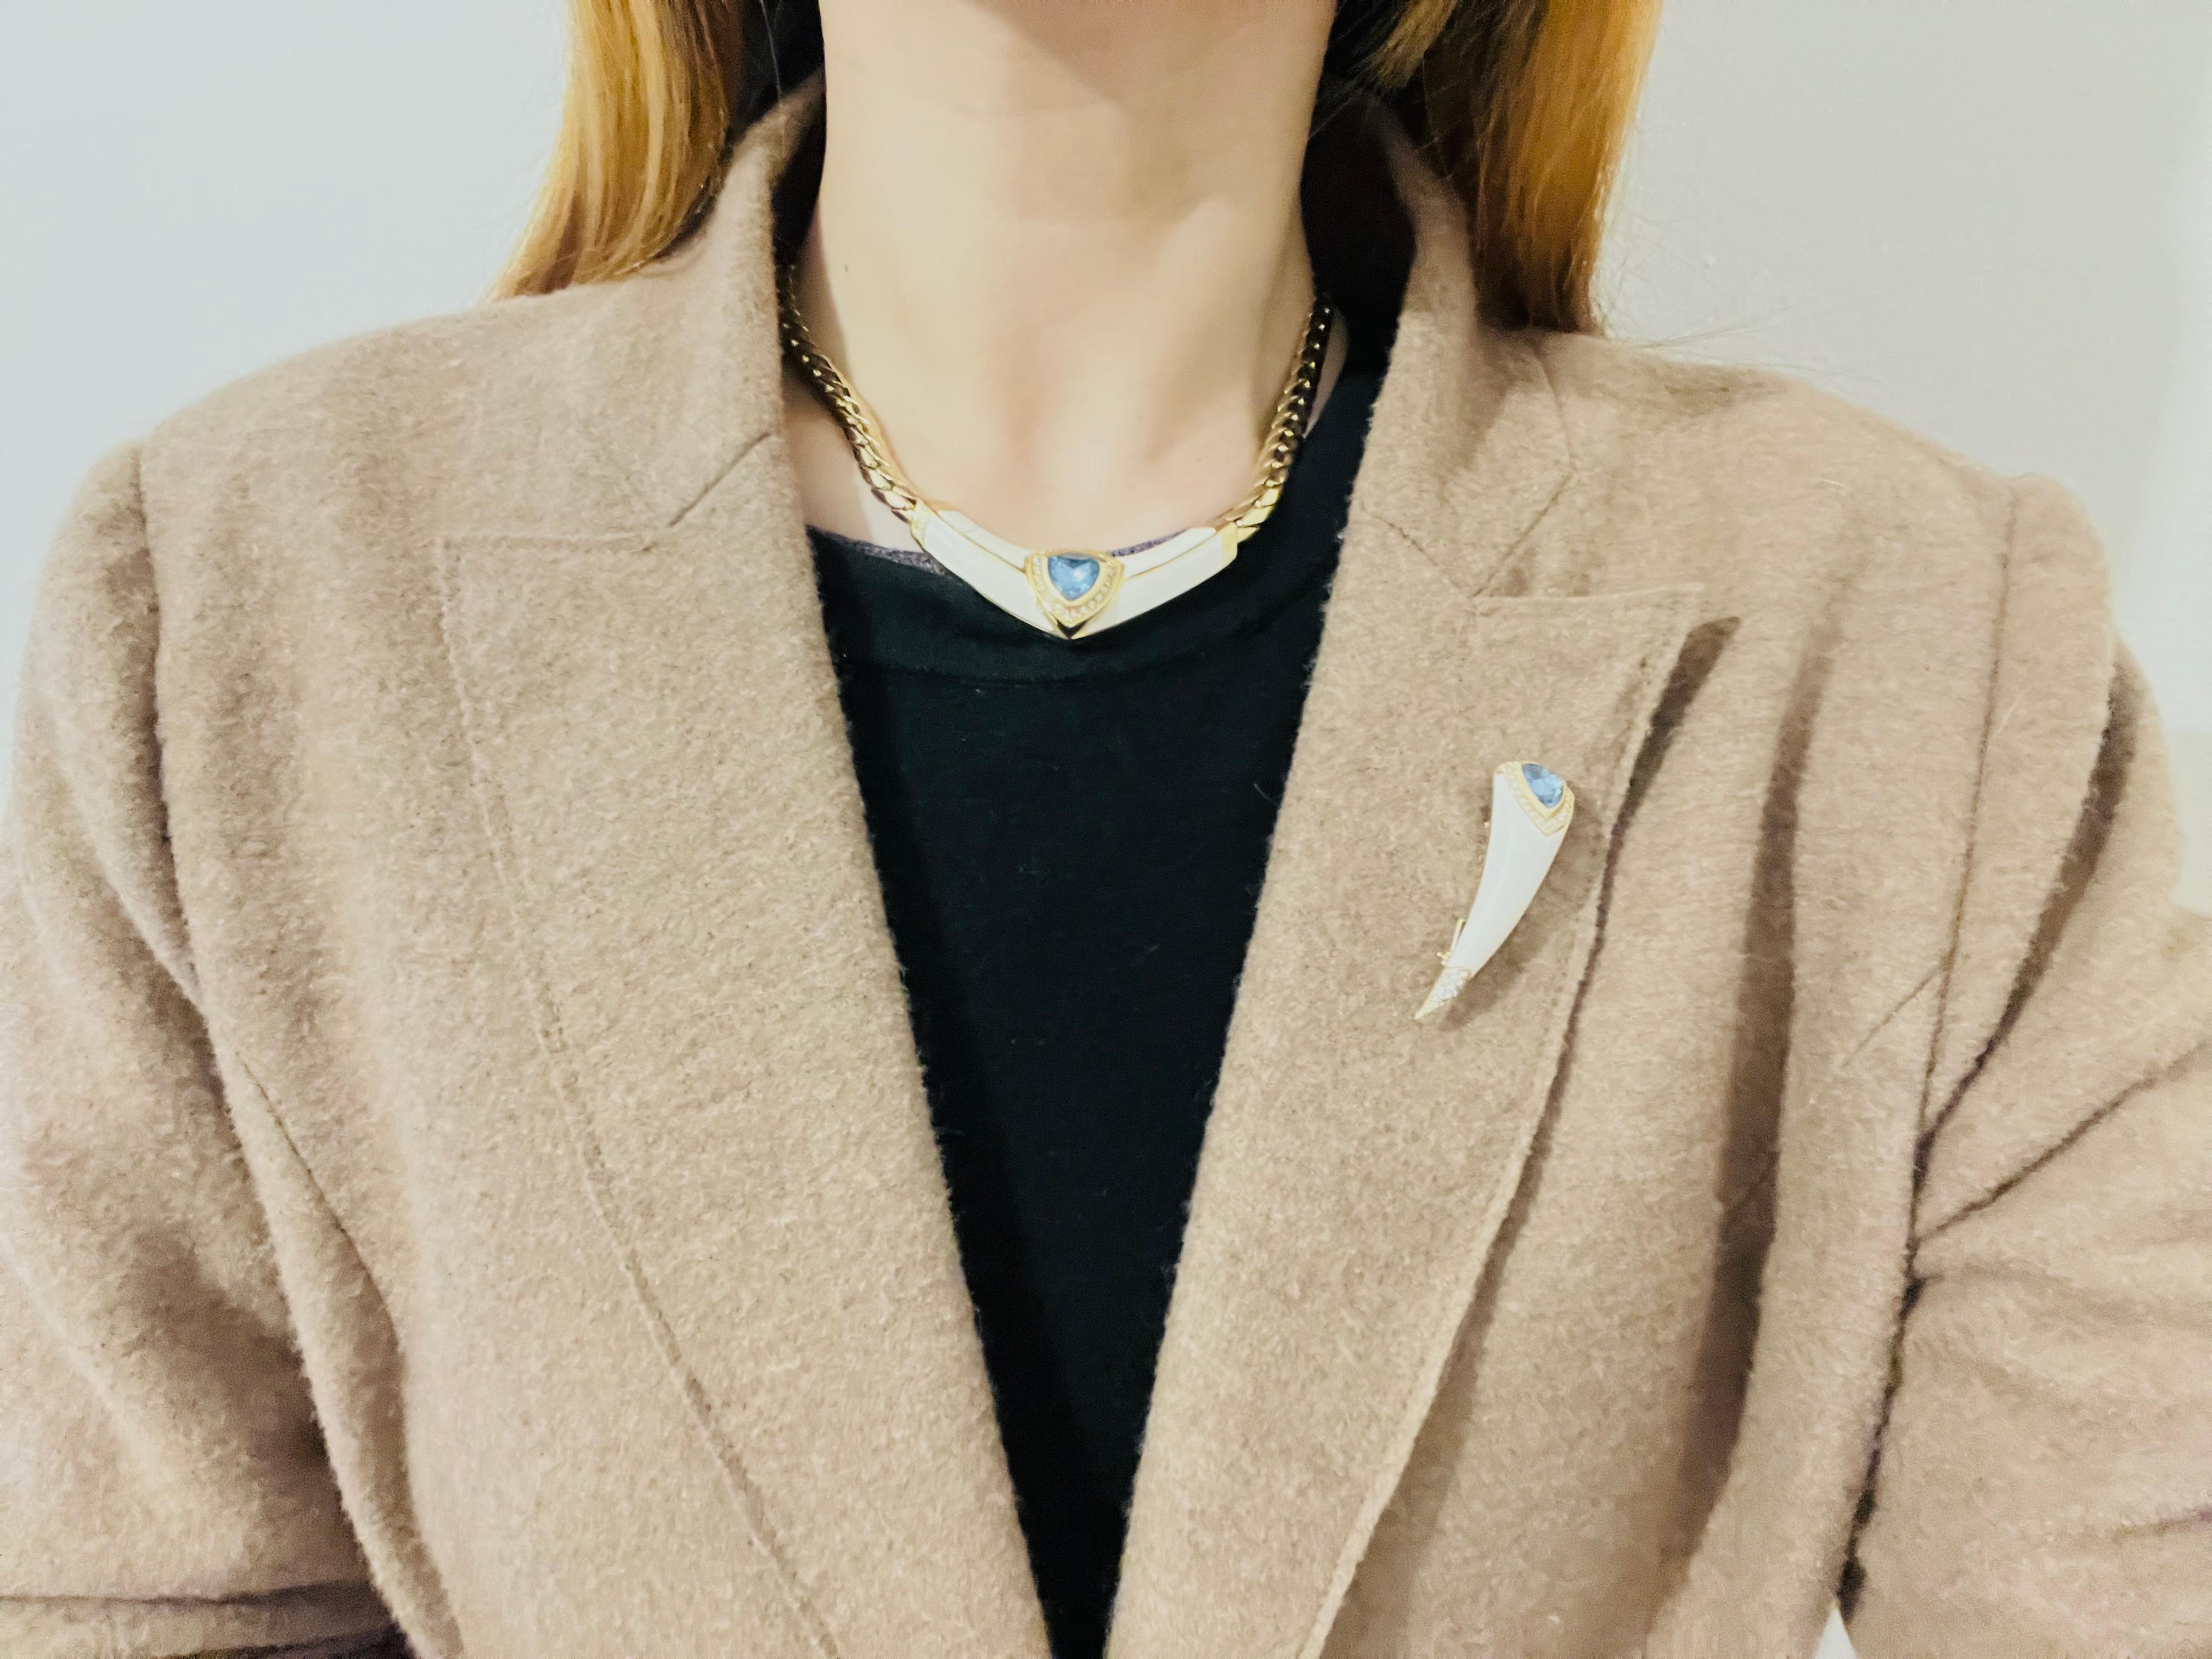 Christian Dior Vintage 1980s Aqua Blue Triangle Crystals Beige Gold Horn Brooch In Excellent Condition For Sale In Wokingham, England